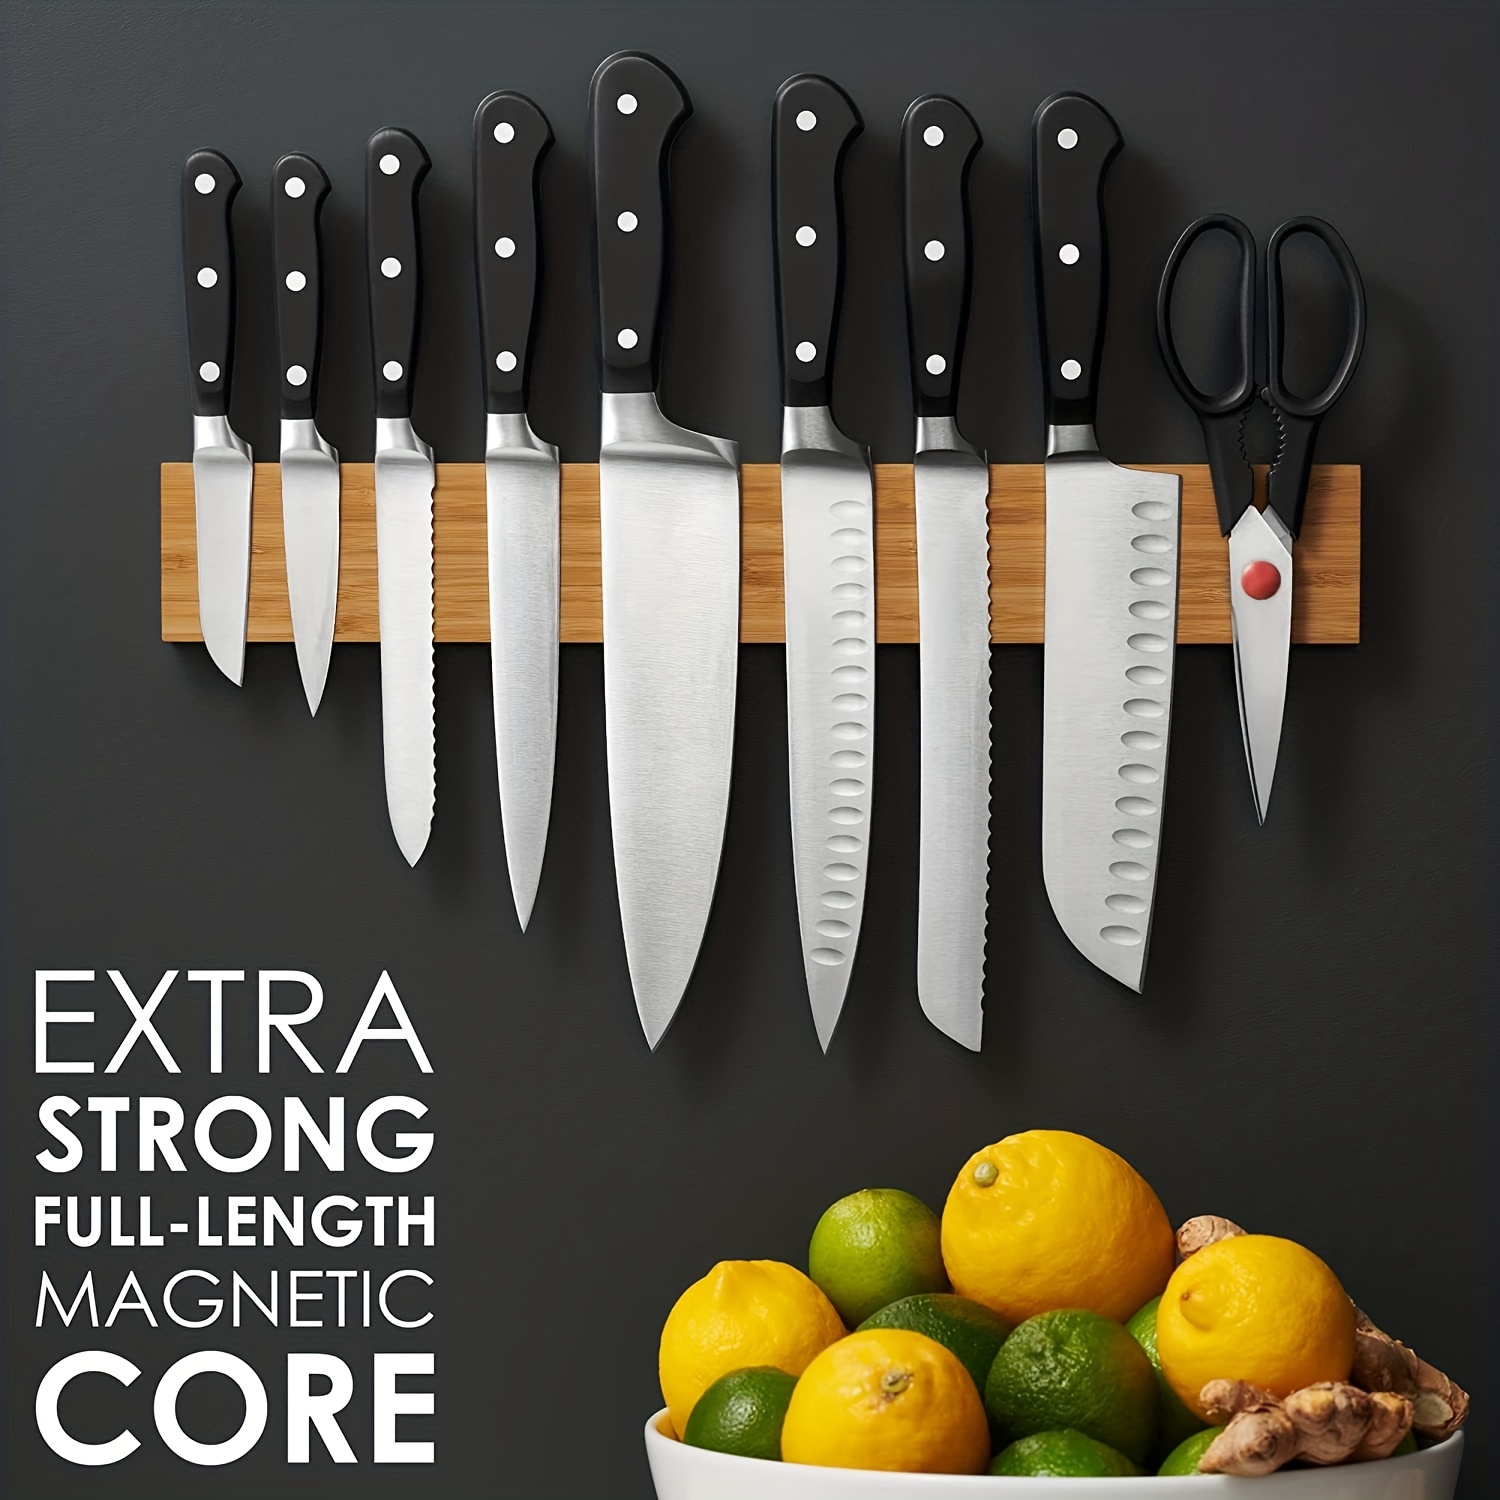 

1pc Magnetic Knife Holder For Wall With Extra Strong Magnet, 16 Inch, Knife Magnetic Strip In Bamboo For Knives, Utensils And Tools, Kitchen Accessories